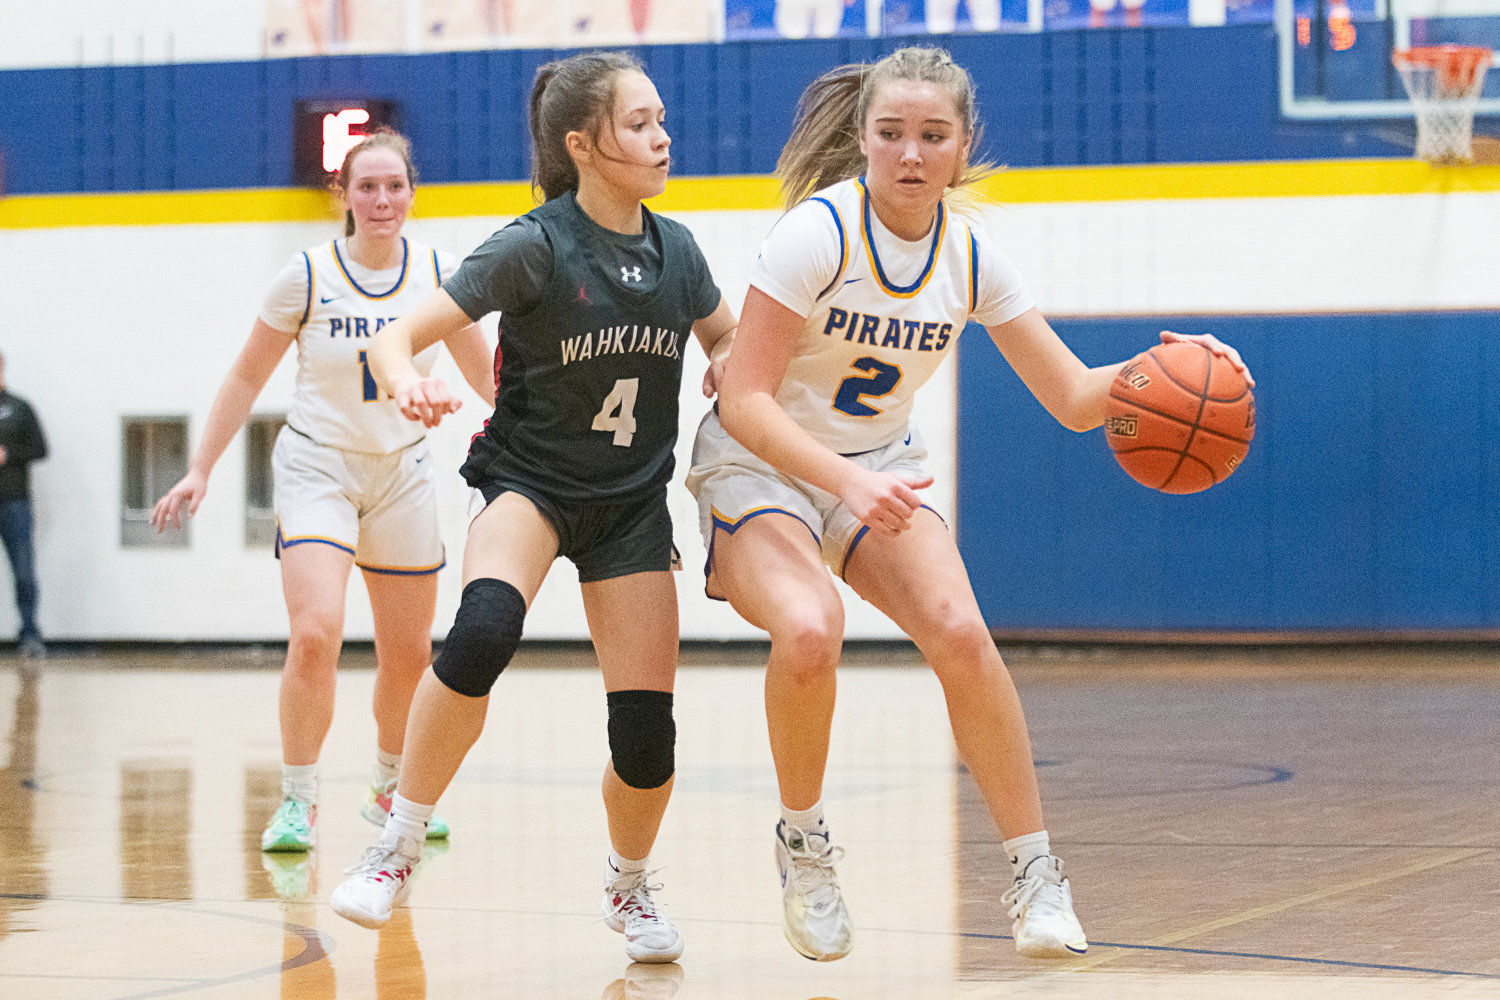 Danika Hallom shields the ball from a defender during Adna's 72-28 win over Wahkiakum on Jan. 13.